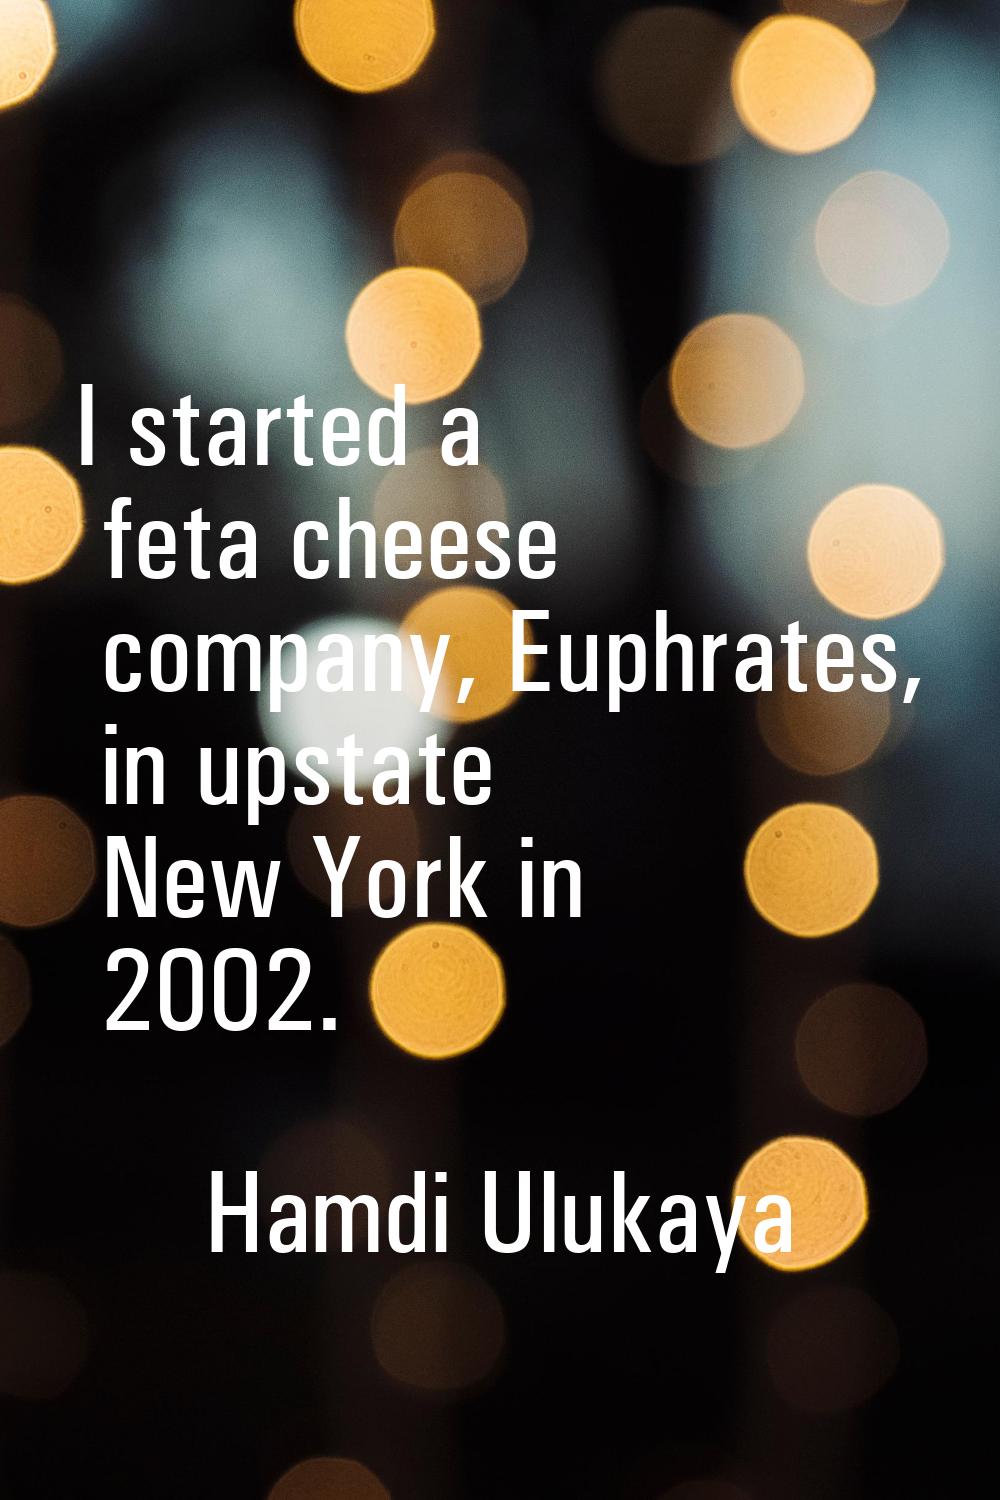 I started a feta cheese company, Euphrates, in upstate New York in 2002.